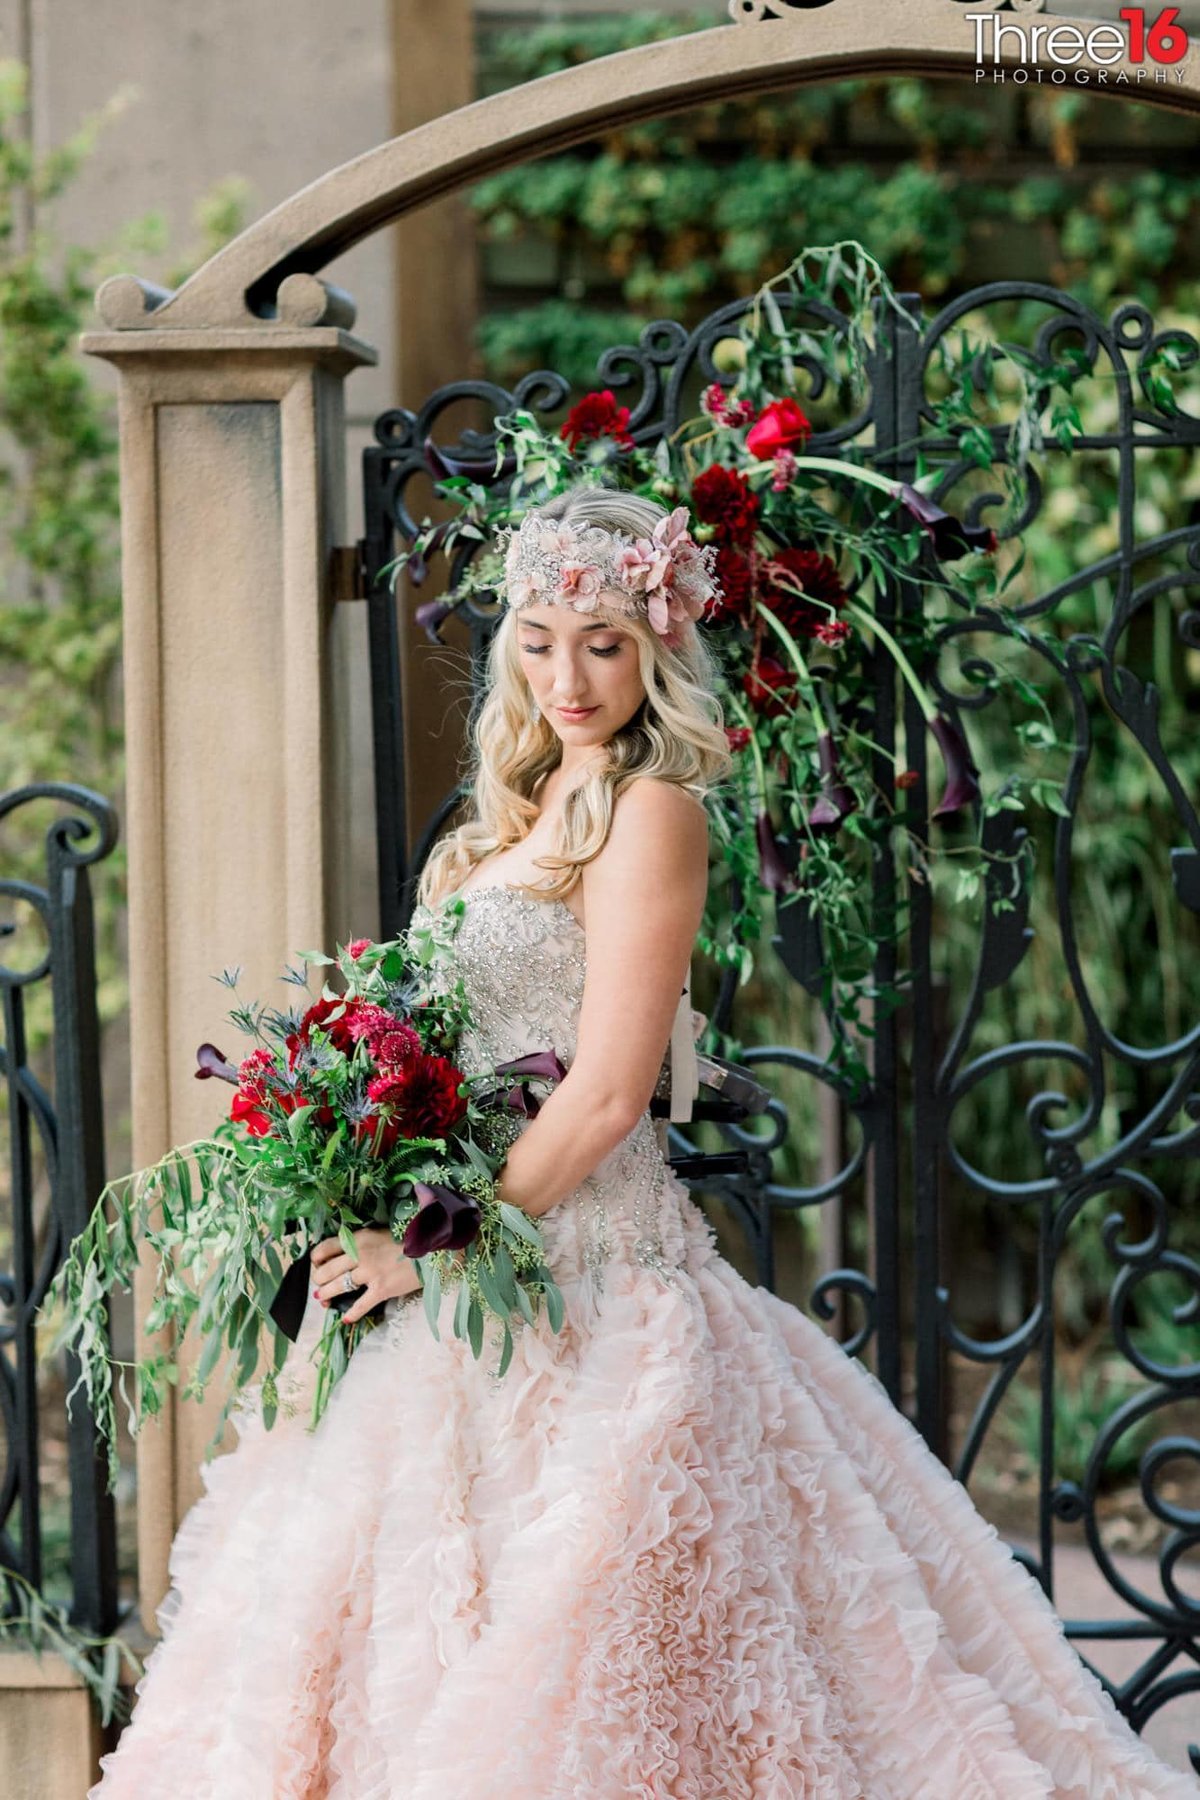 Bride poses for photos with her beautiful bouquet